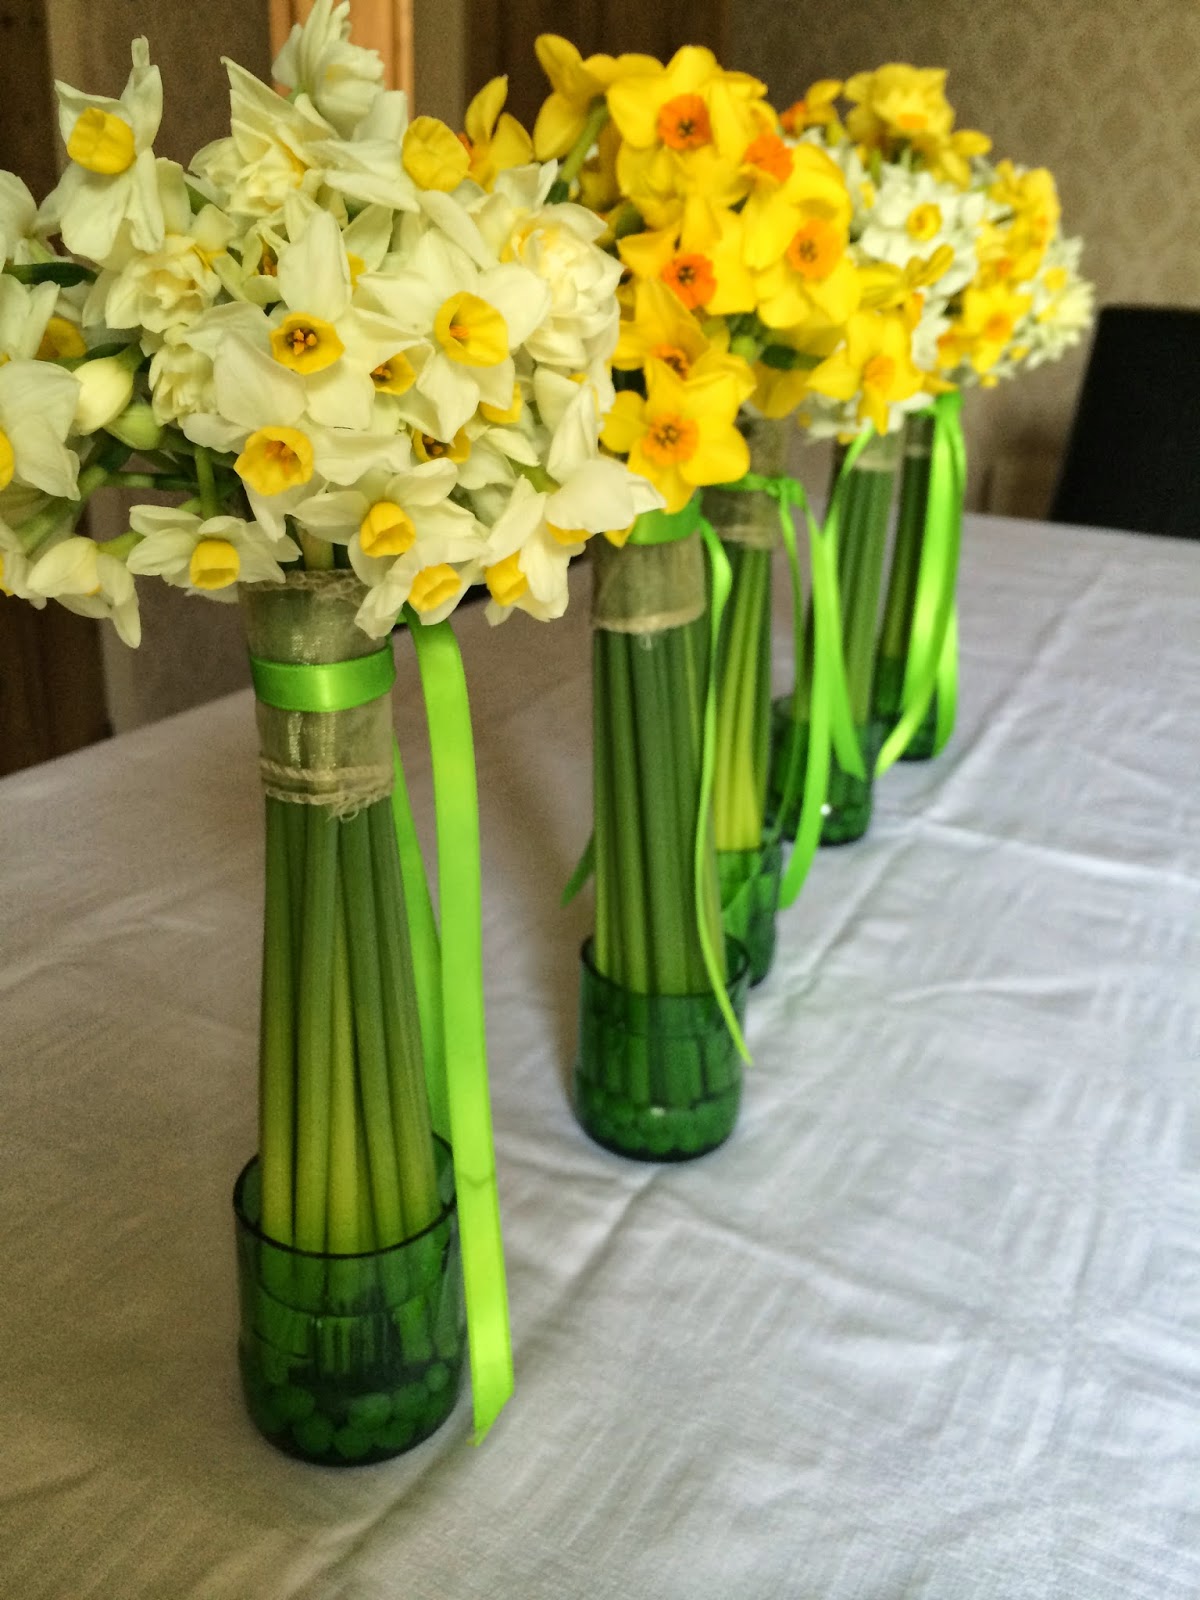 Gorgeous scented British narcissi in recycled bottle vases